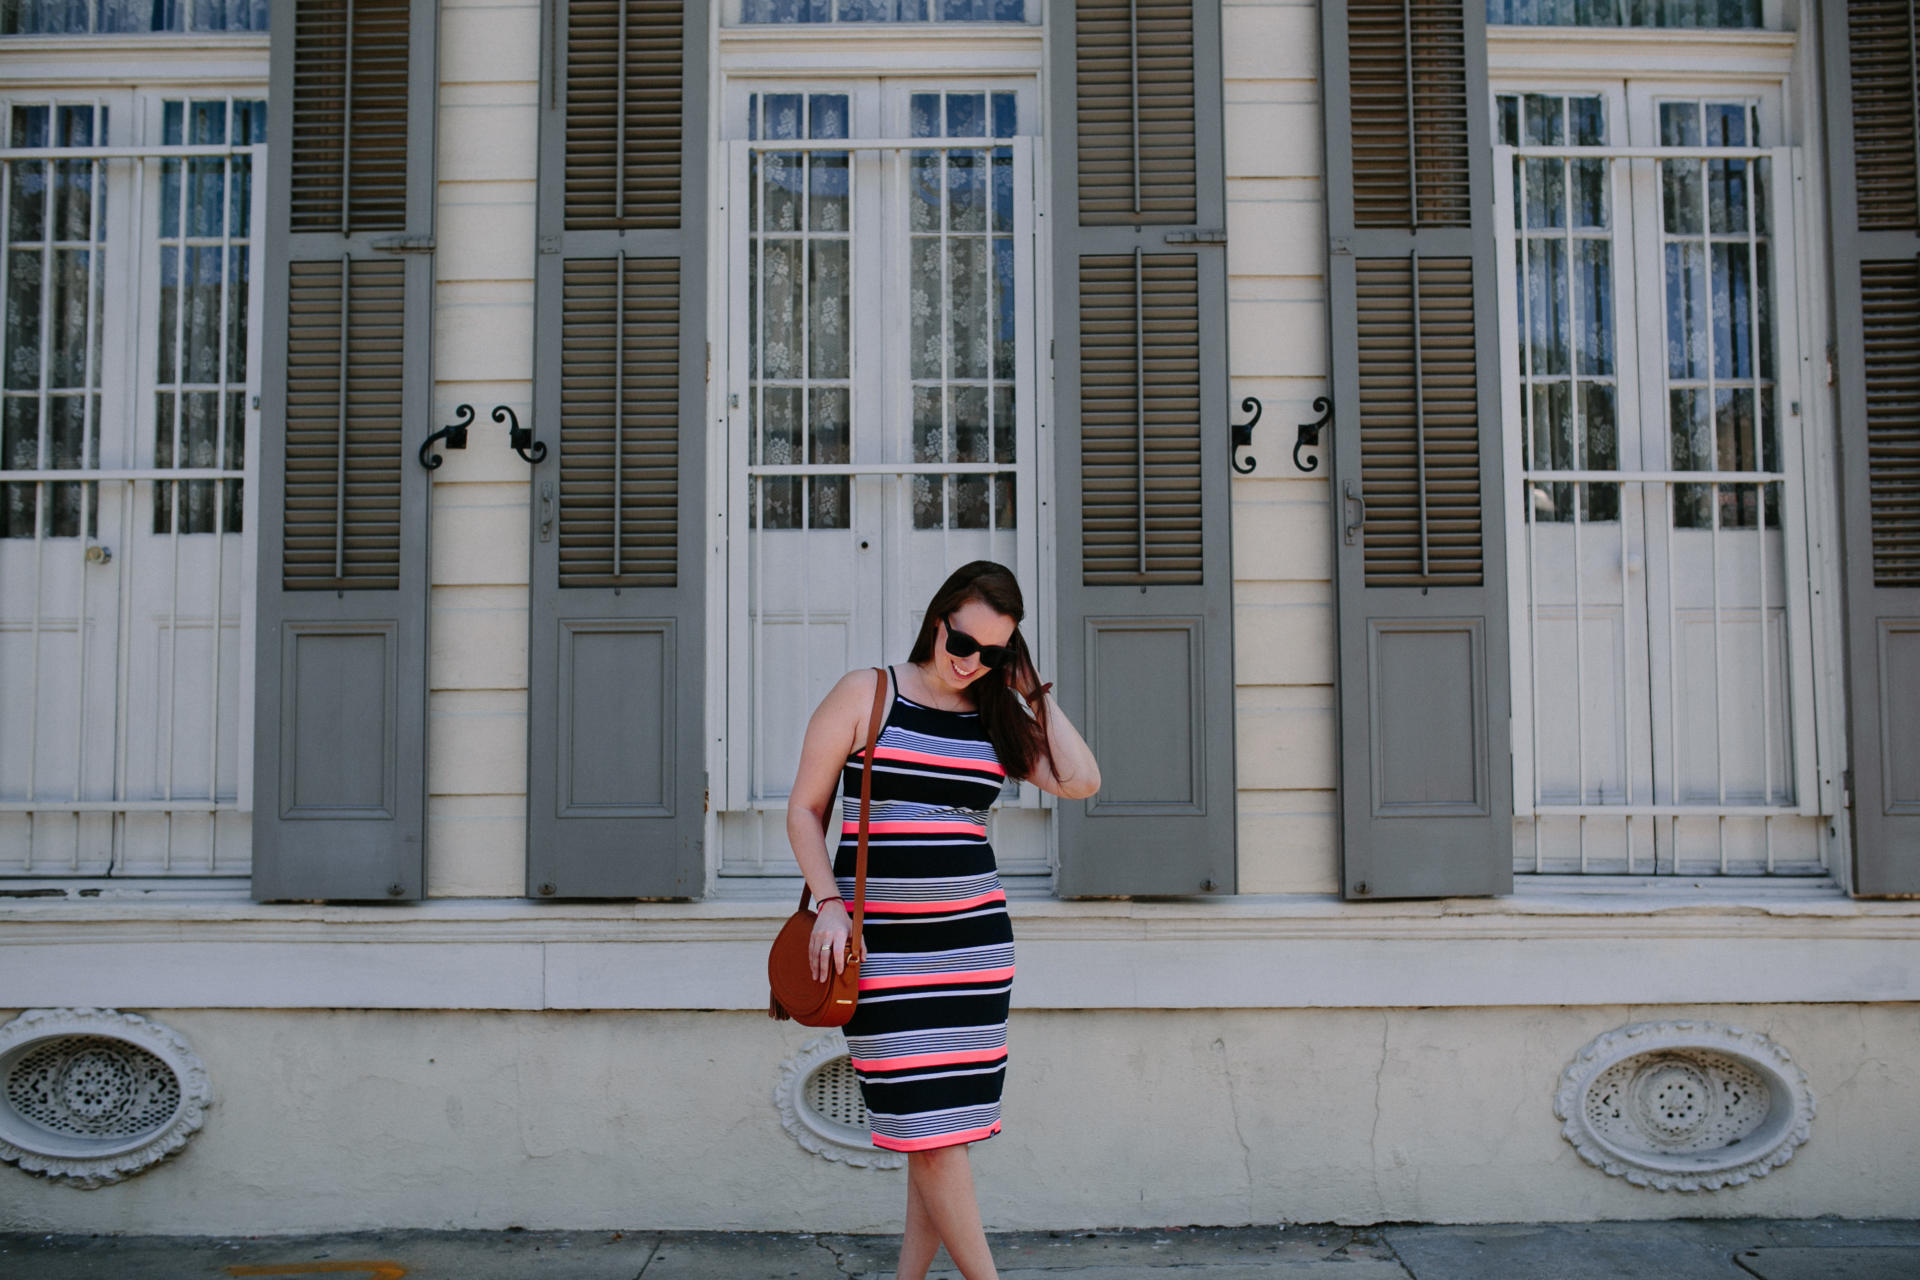 STYLE: French Quarter Stripes with a Superdry Dress by New Jersey style blogger What's For Dinner Esq.